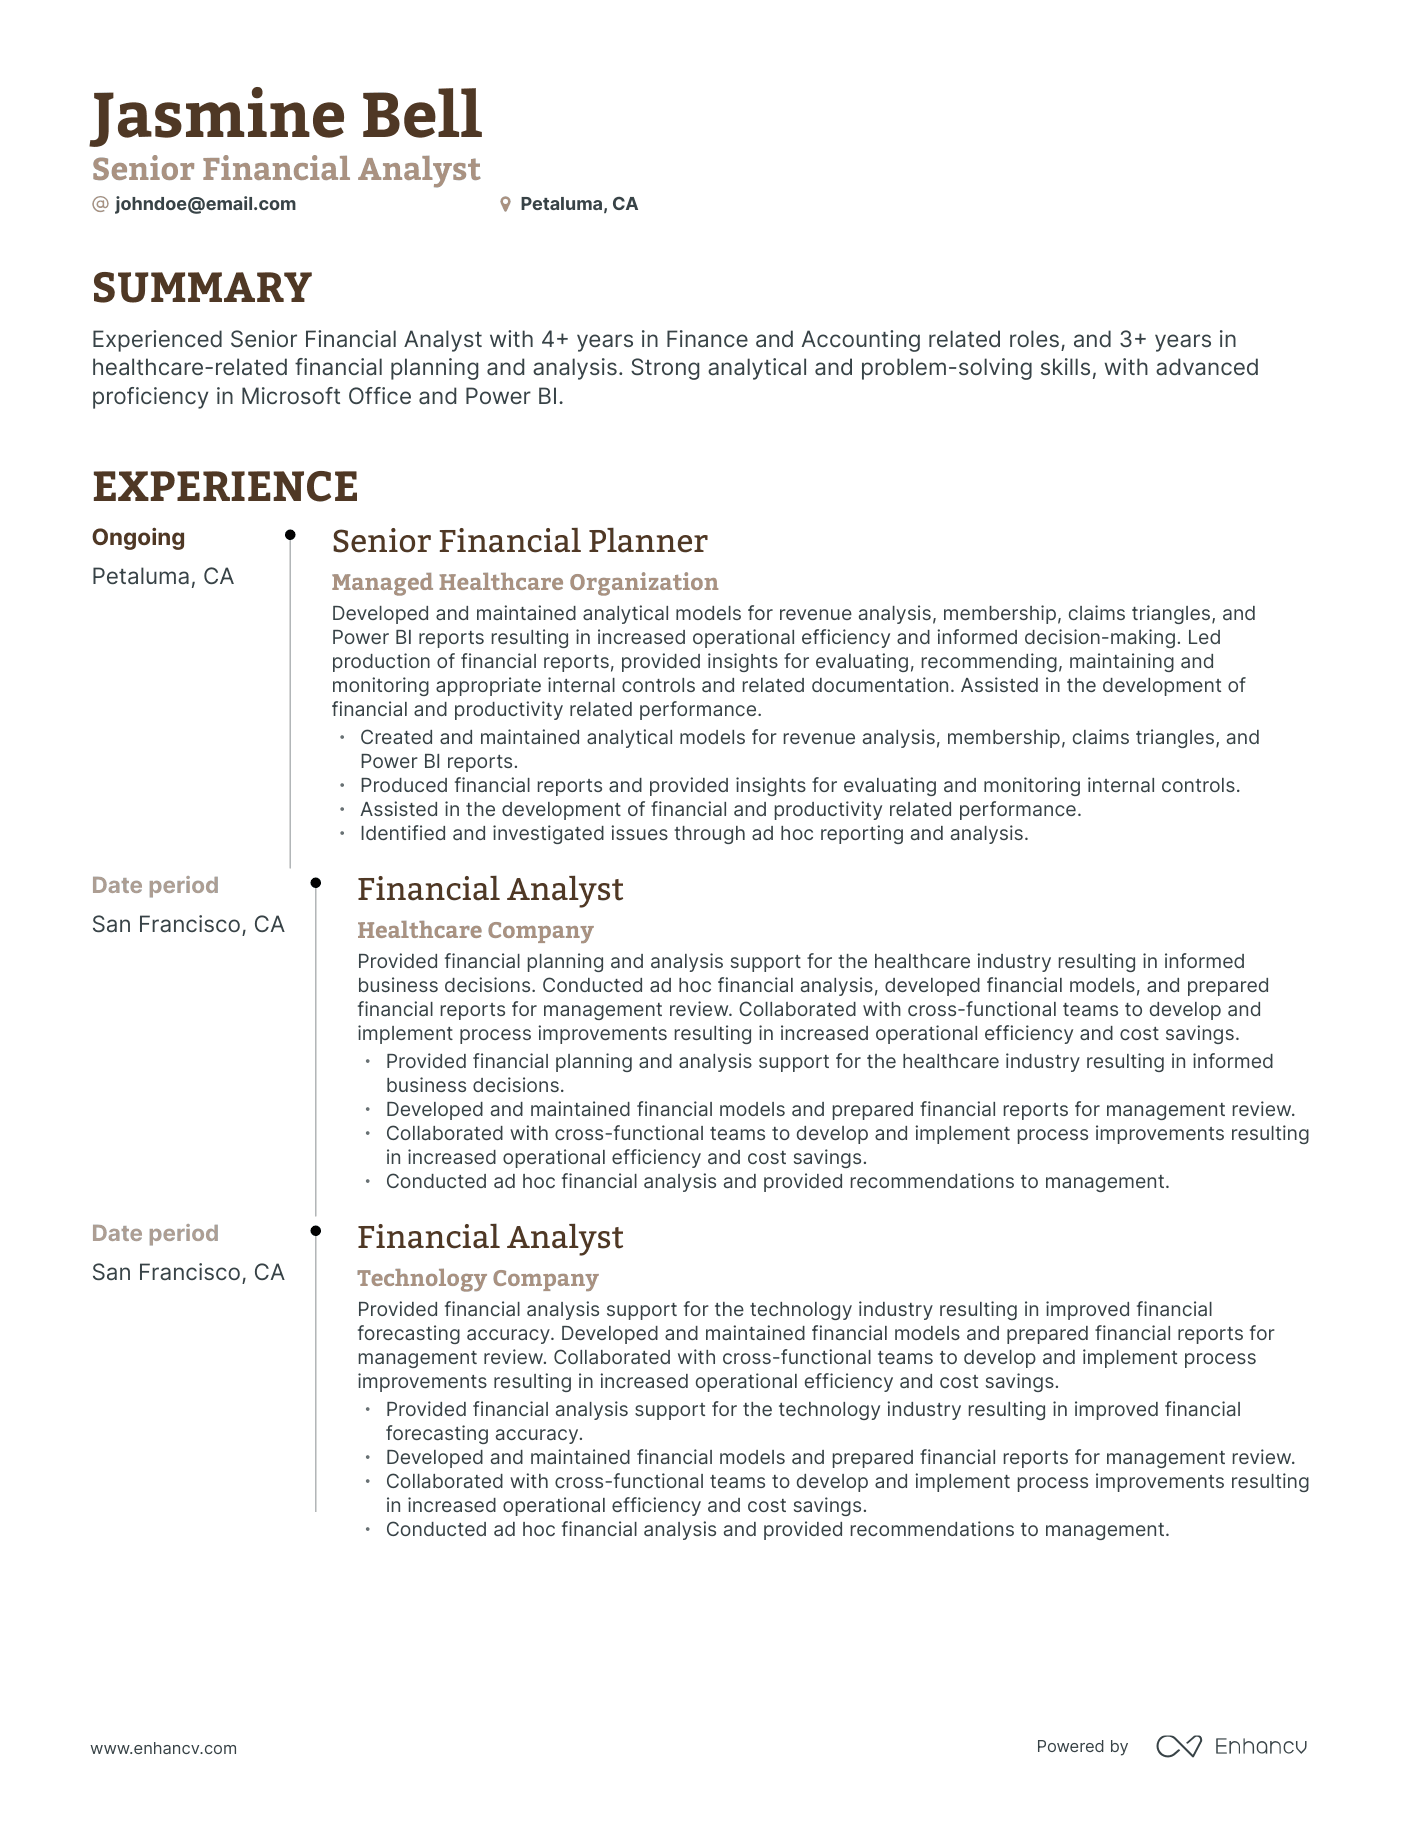 Timeline Business Analyst Accounting Resume Template